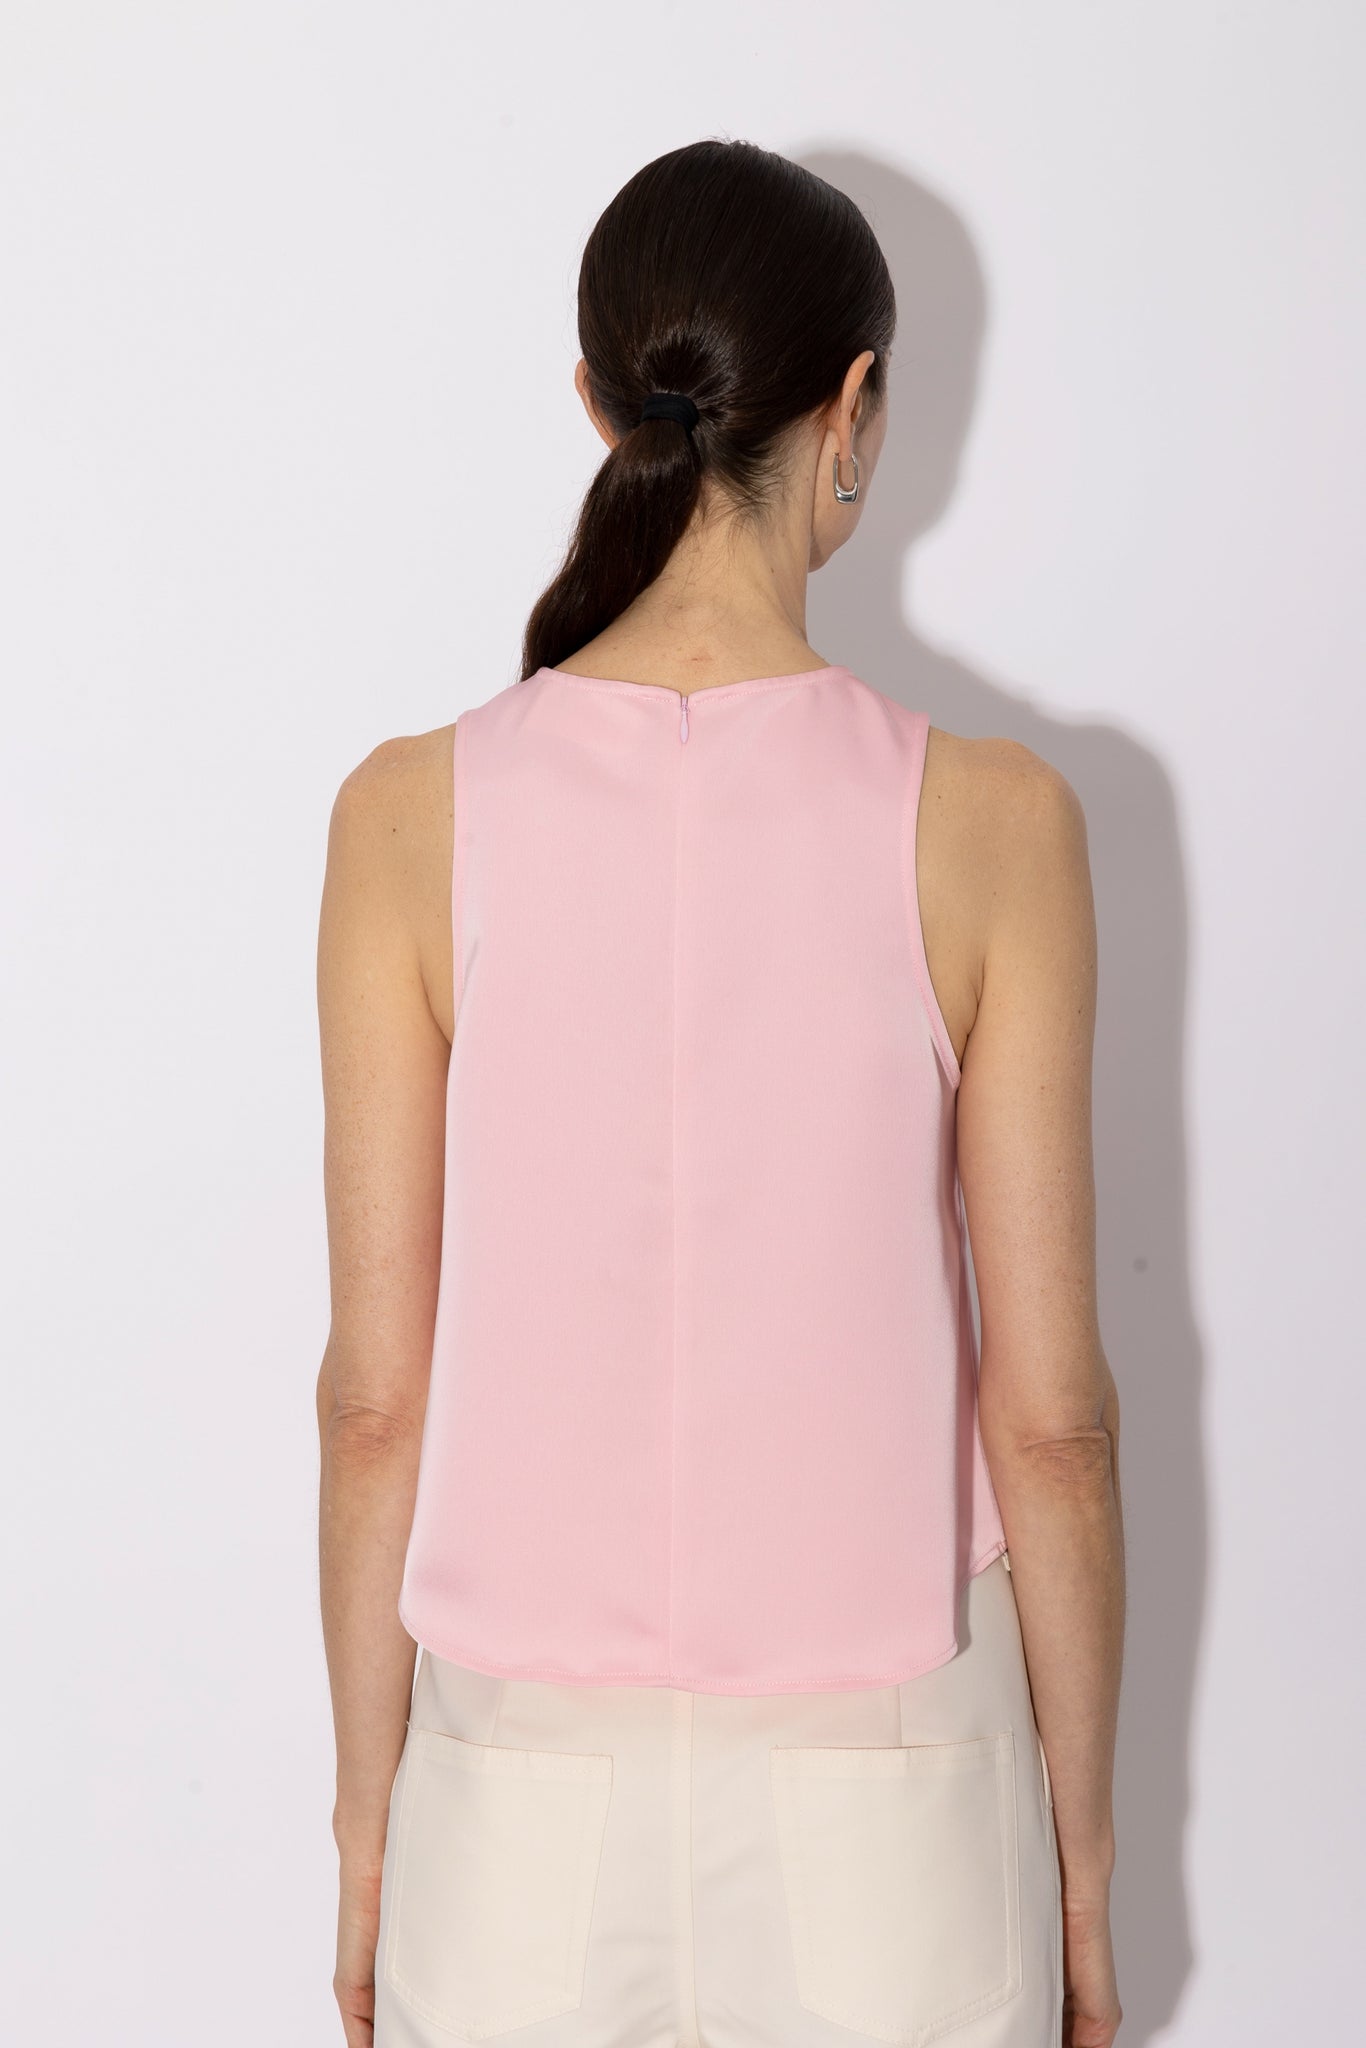 TOPPIE top | CANDY PINK